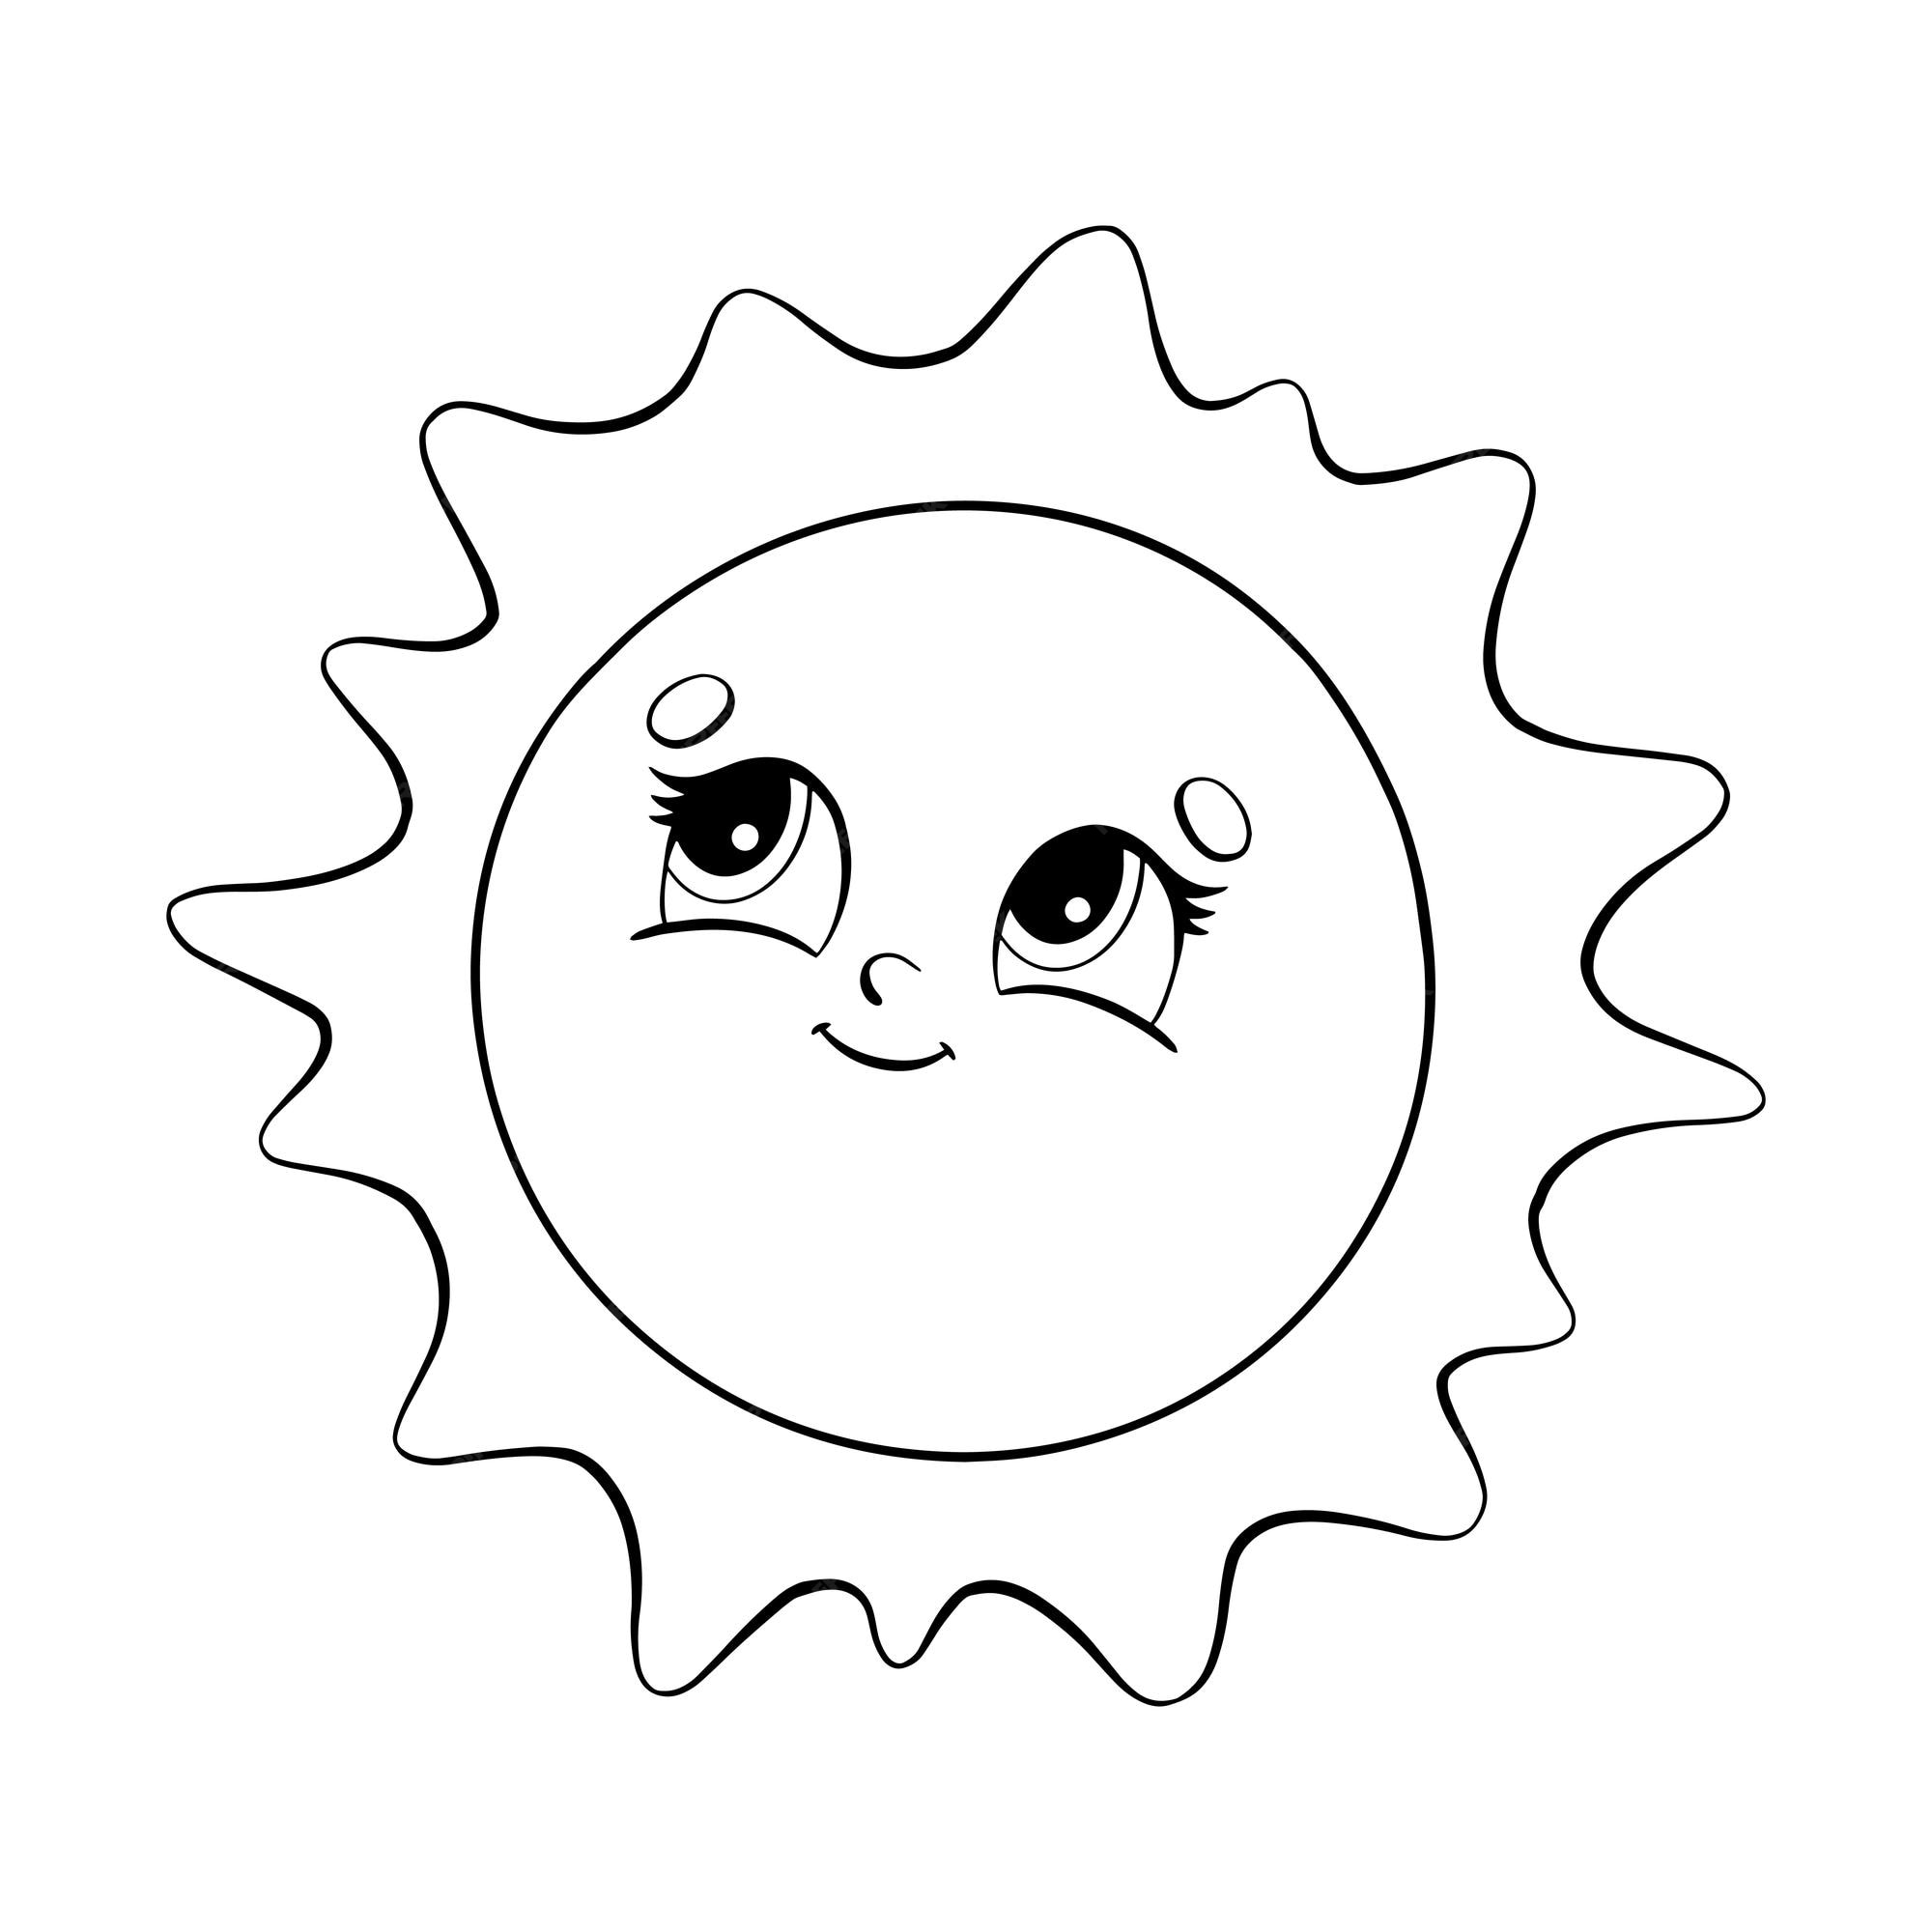 Premium vector coloring page for kids cute sun digital stamp cartoon style character